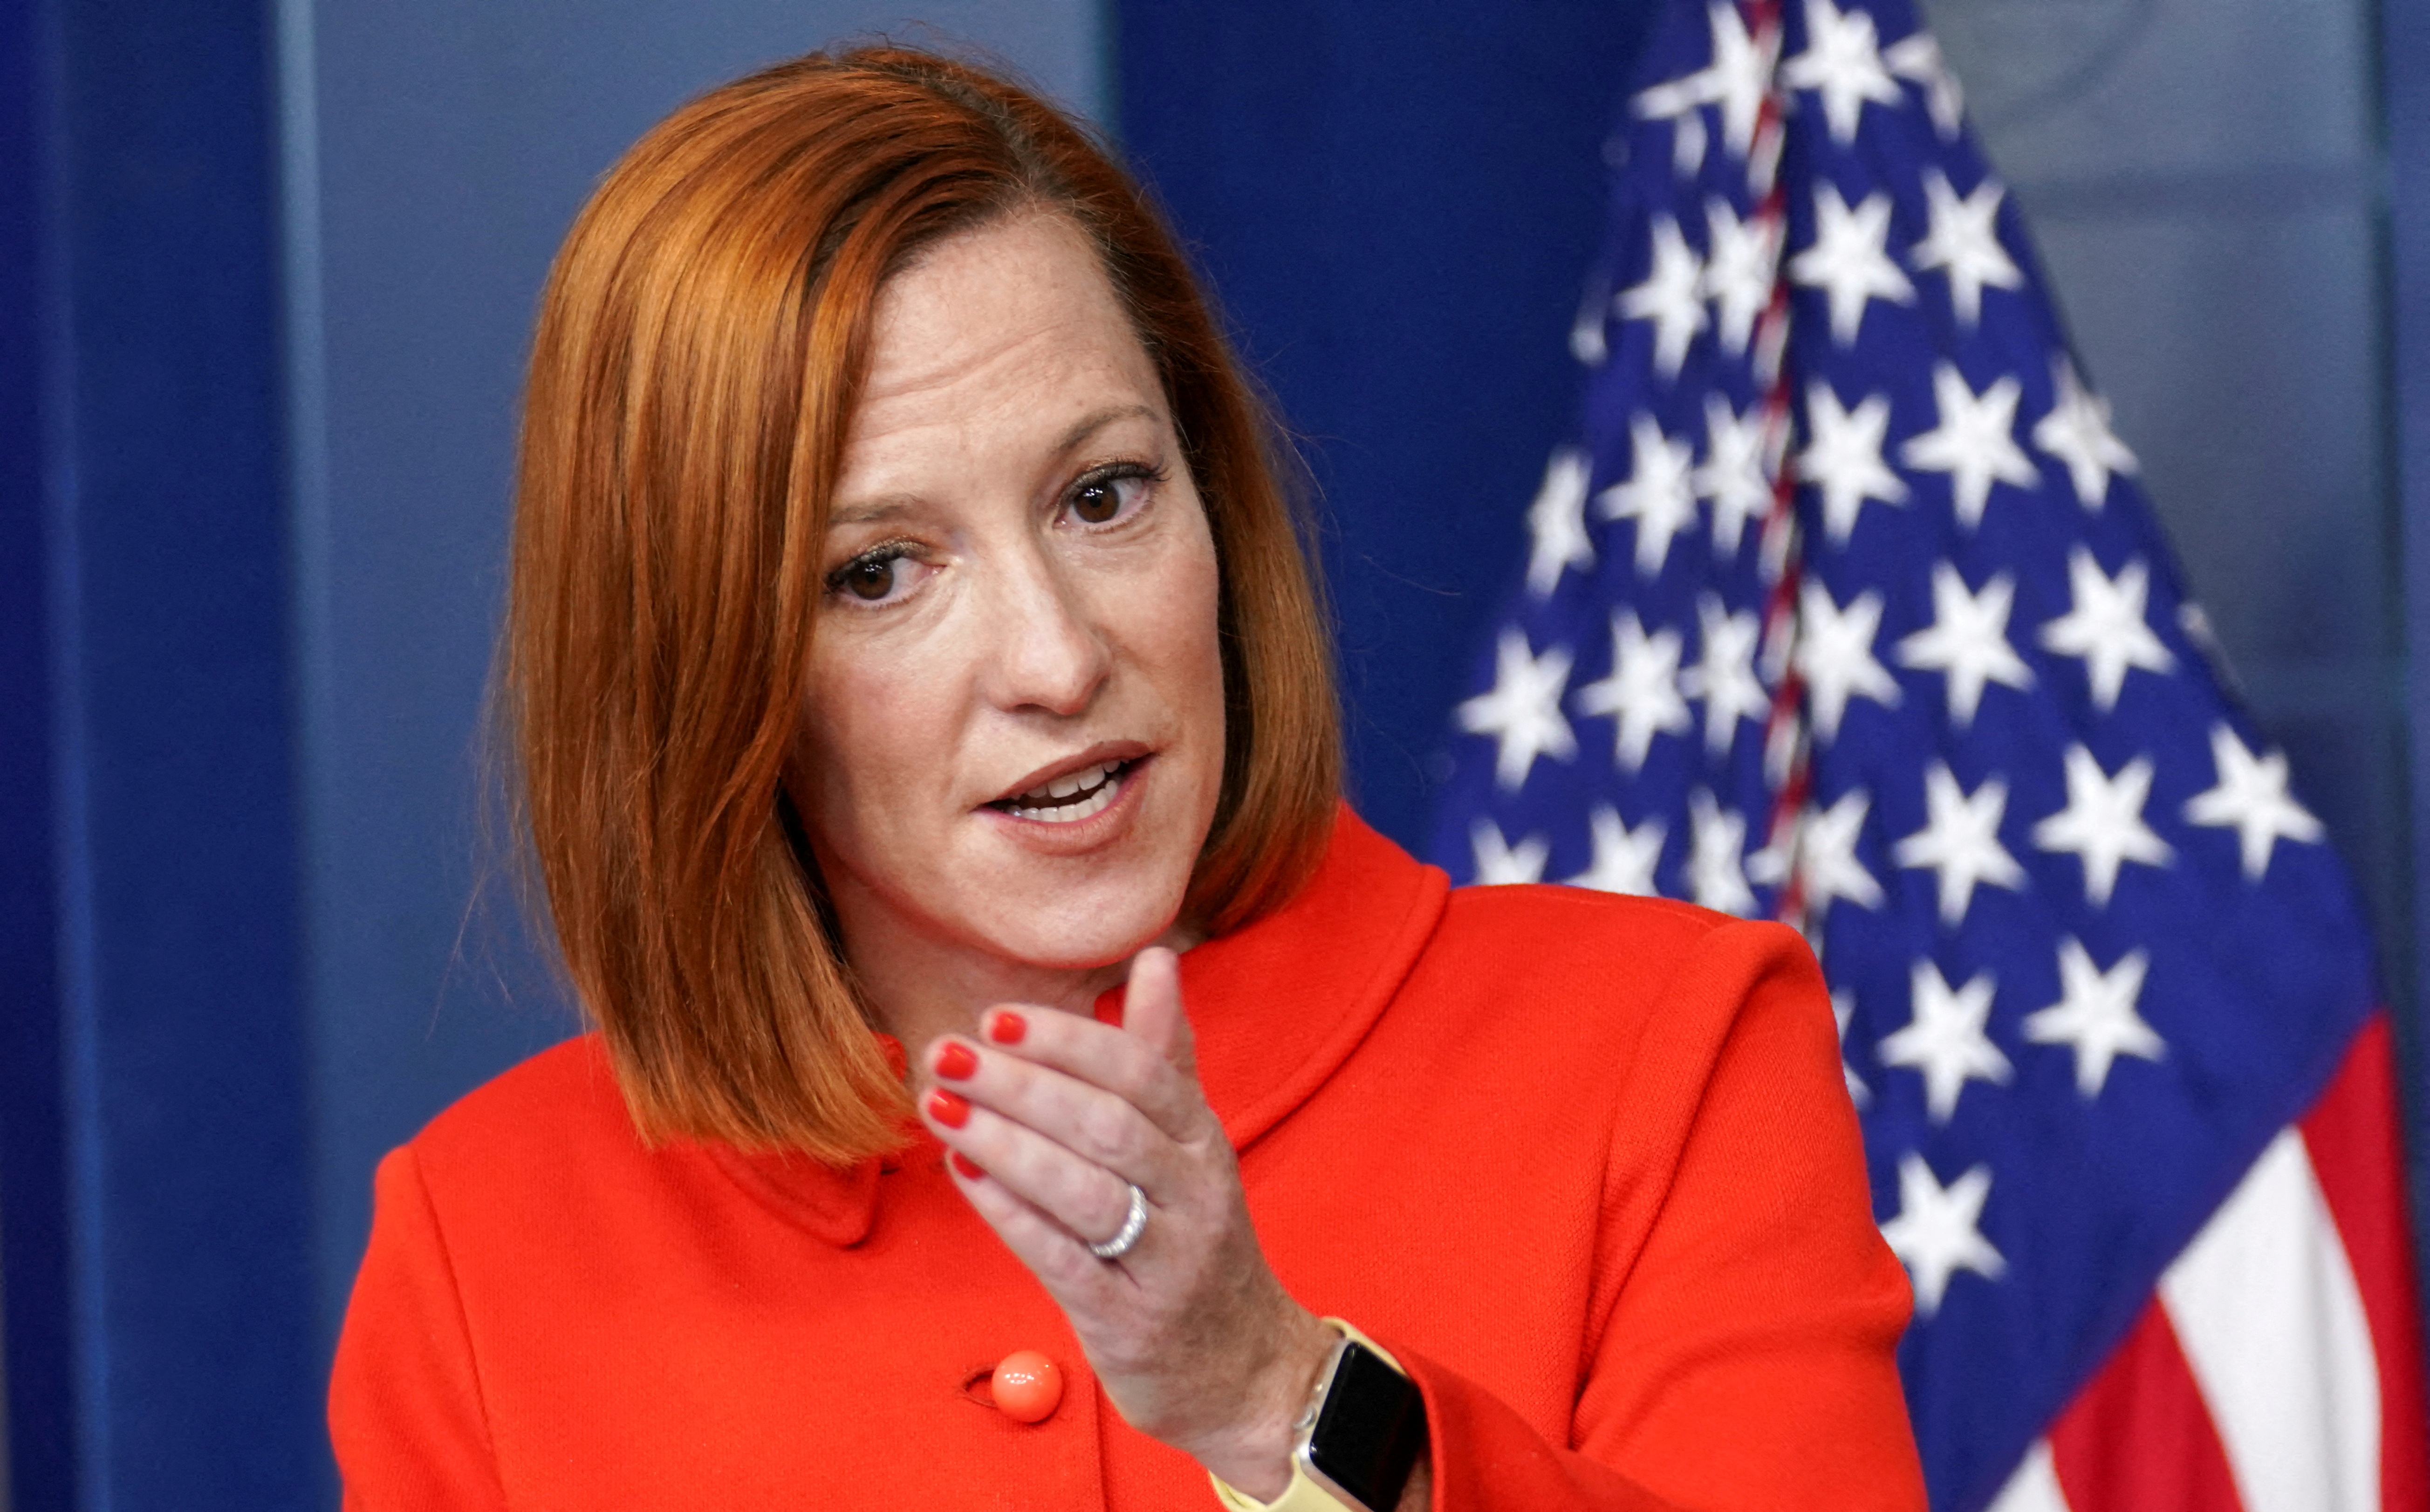 U.S. White House press secretary Jen Psaki speaks during a press briefing at the White House in Washington, U.S., Dec. 20, 2021. REUTERS/Kevin Lamarque